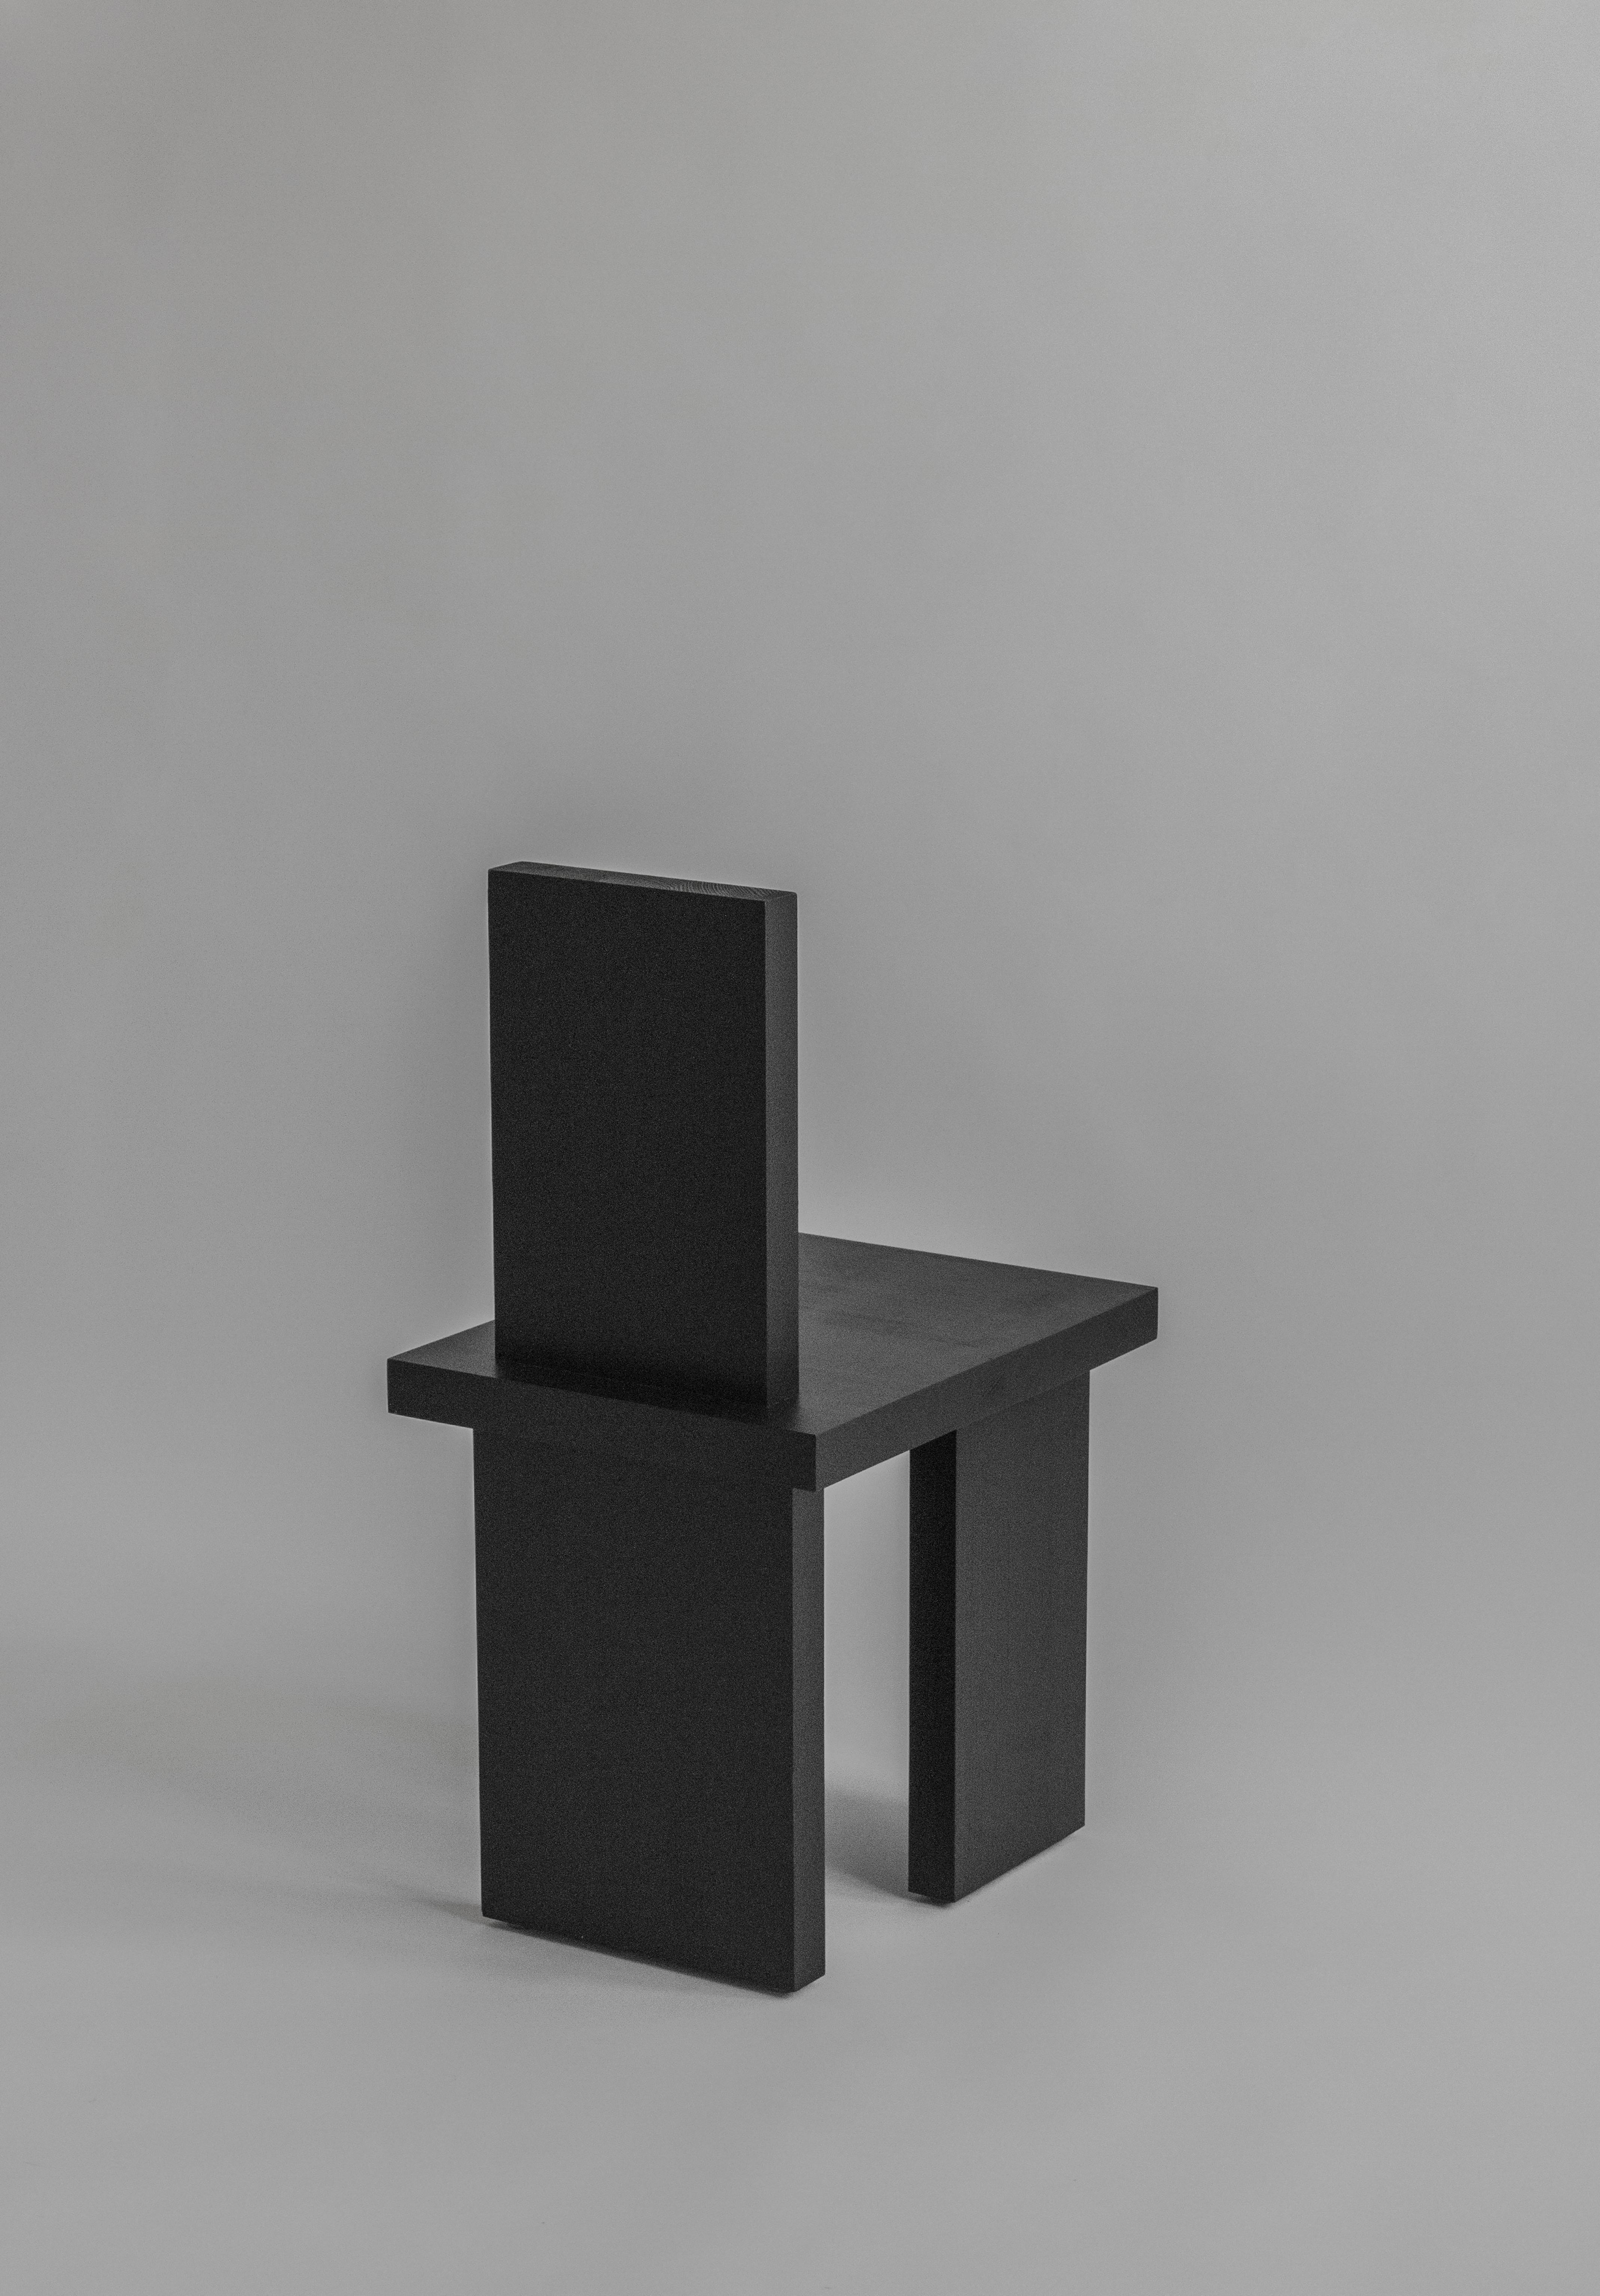 ItooRaba dining chair by Sizar Alexis
Signed
Dimensions: length 36 x width 47 x height 77cm
Seat height 42cm

Comes in stained black, white and natural pine

A furniture series that embraces geometrical shapes. Inspired by the passion for Brutalism,